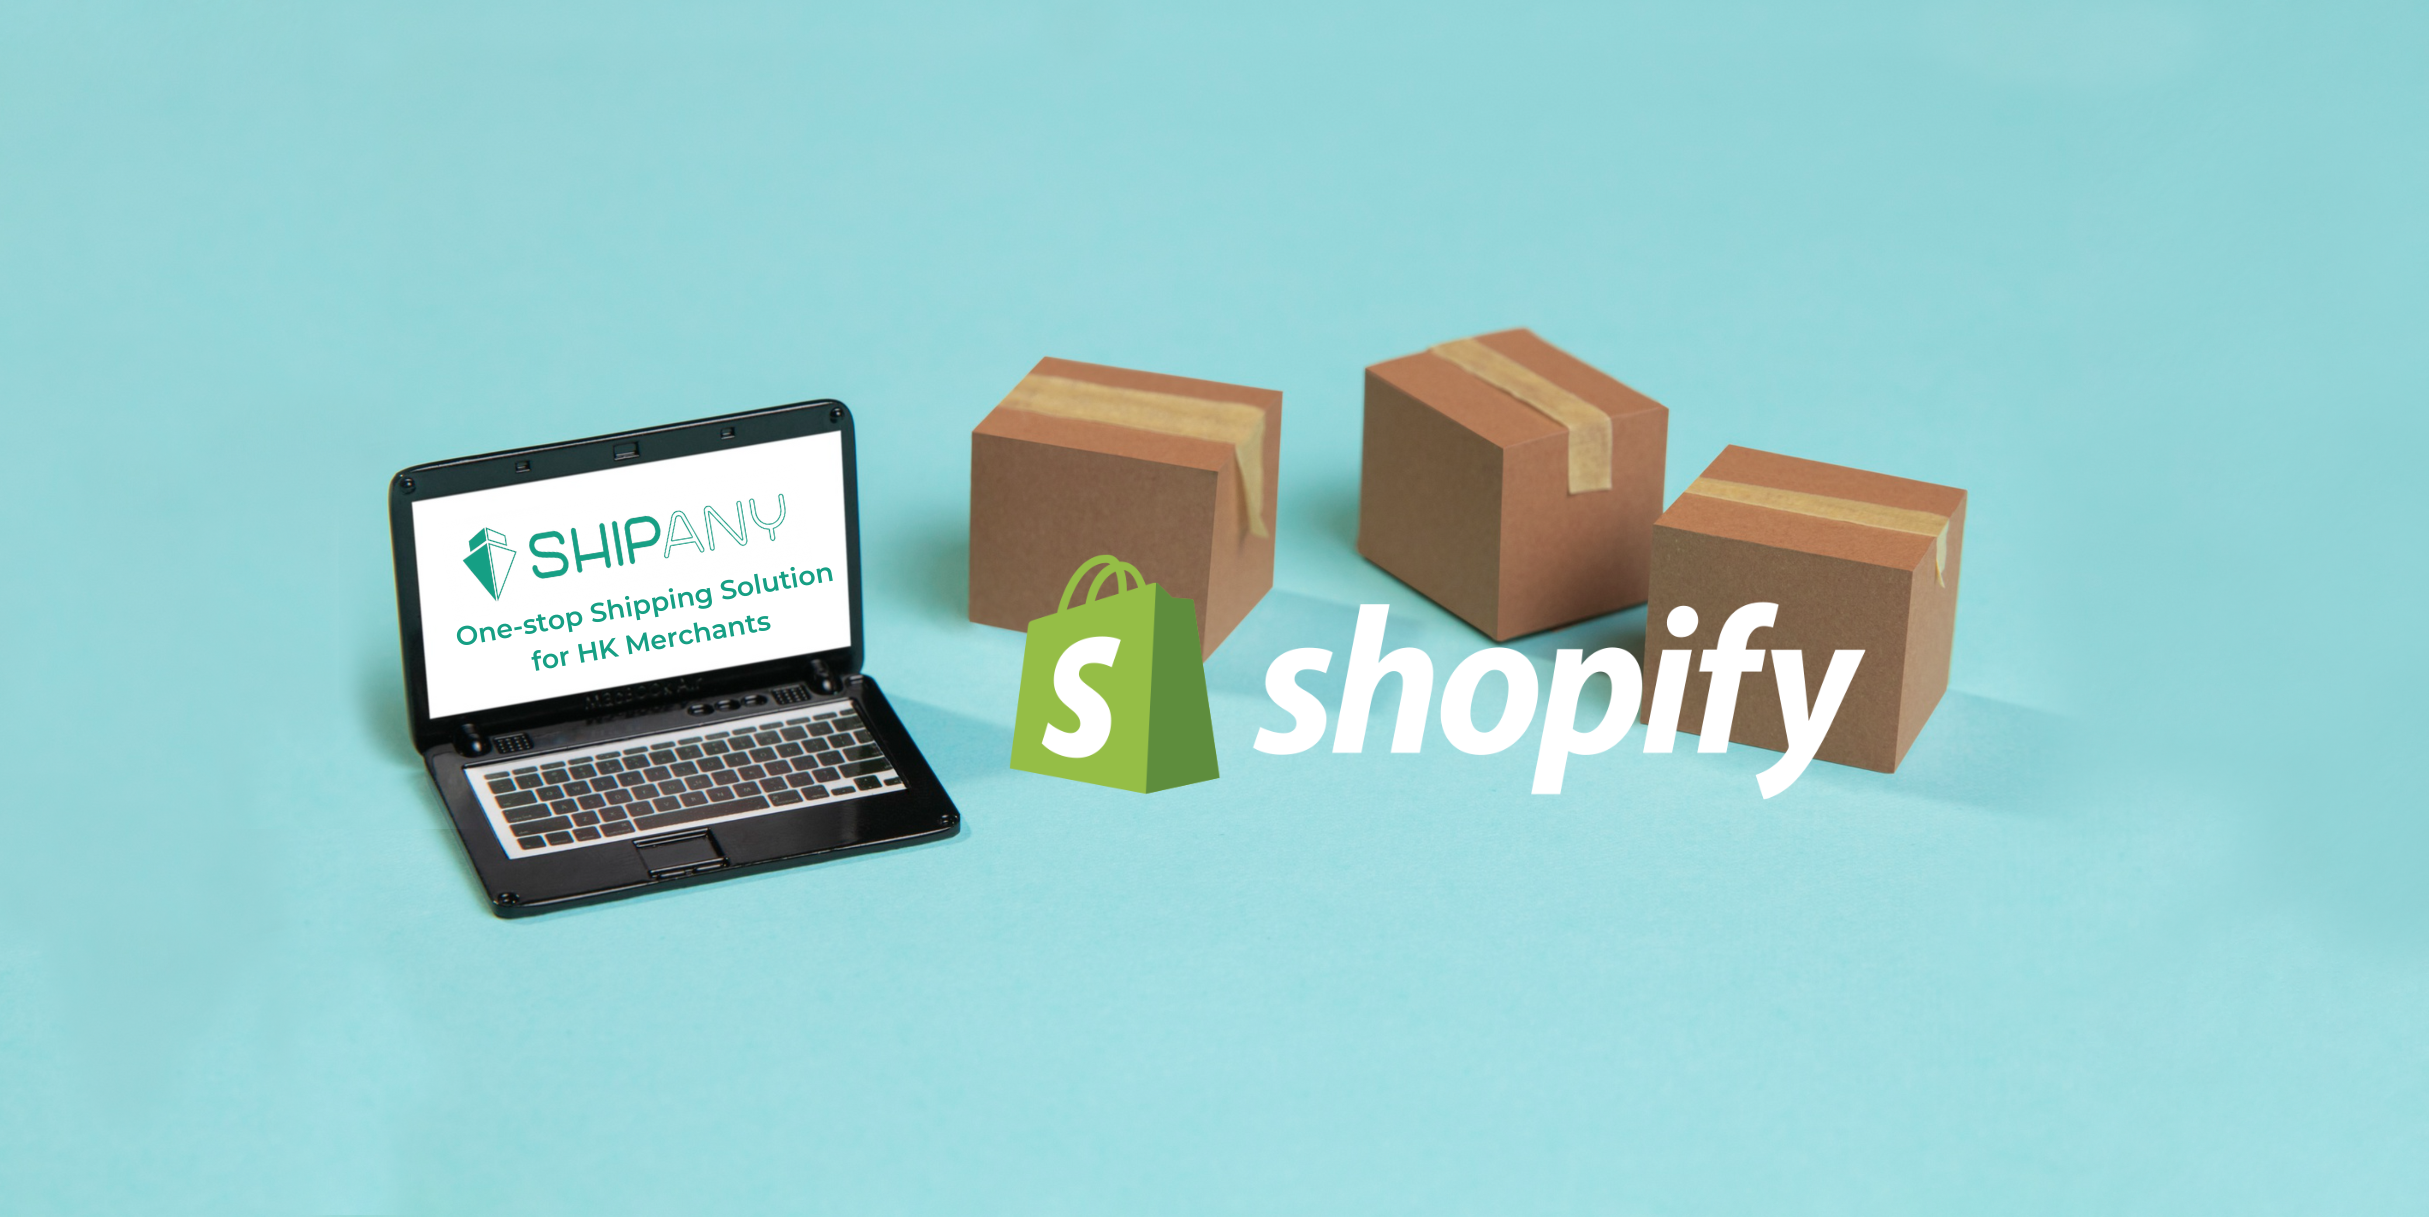 ShipAny—One-stop Shipping Solution for Shopify HK Merchants 